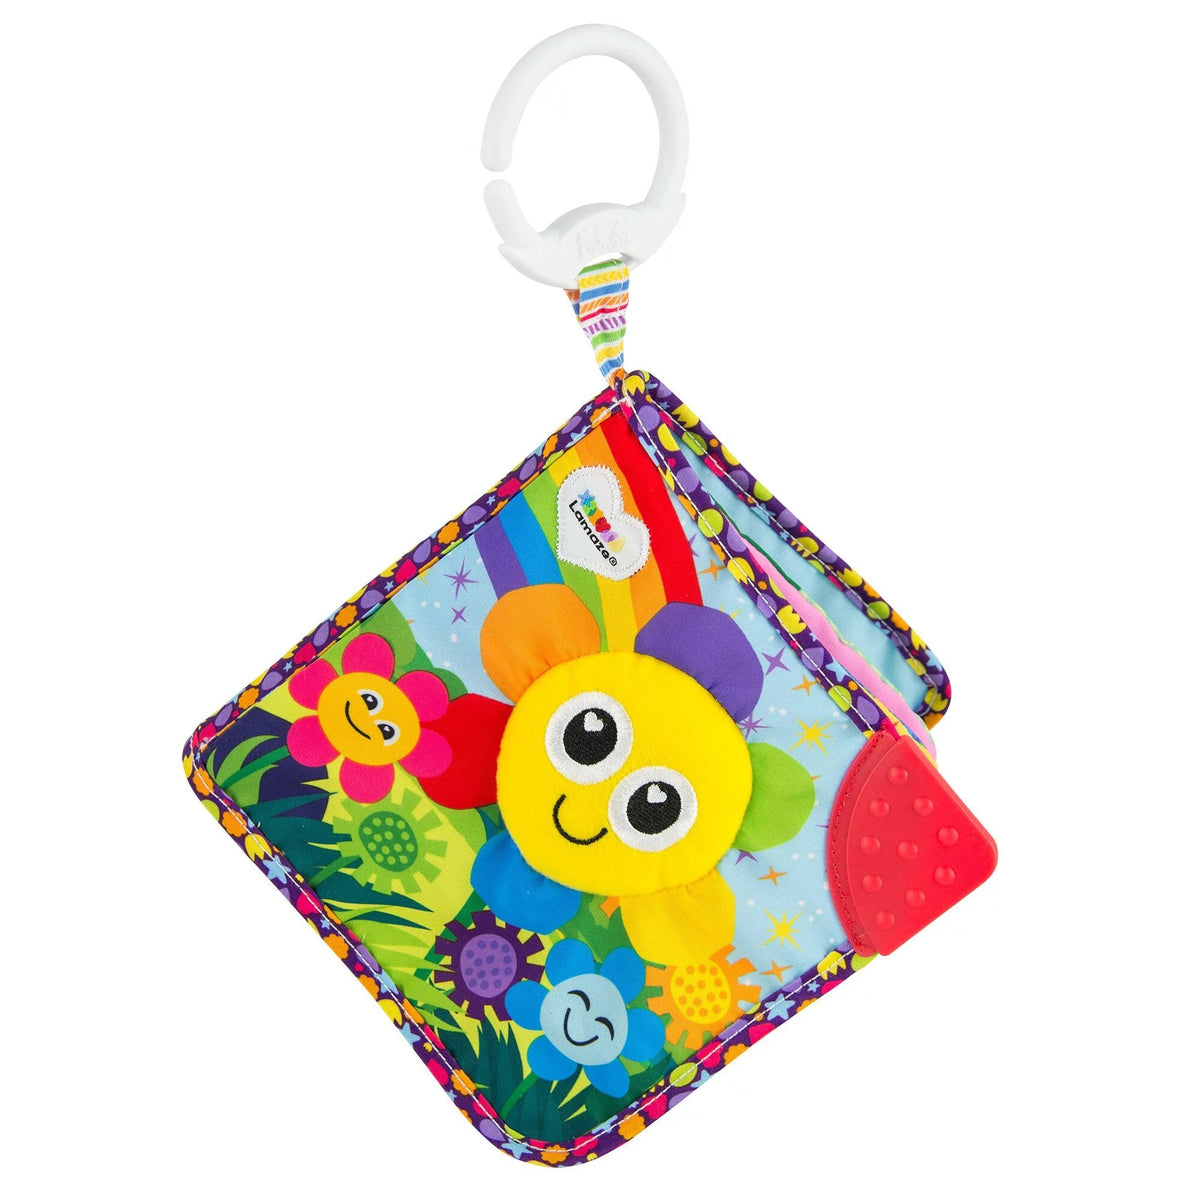 lamaze-soft-book-with-teether-colors-1